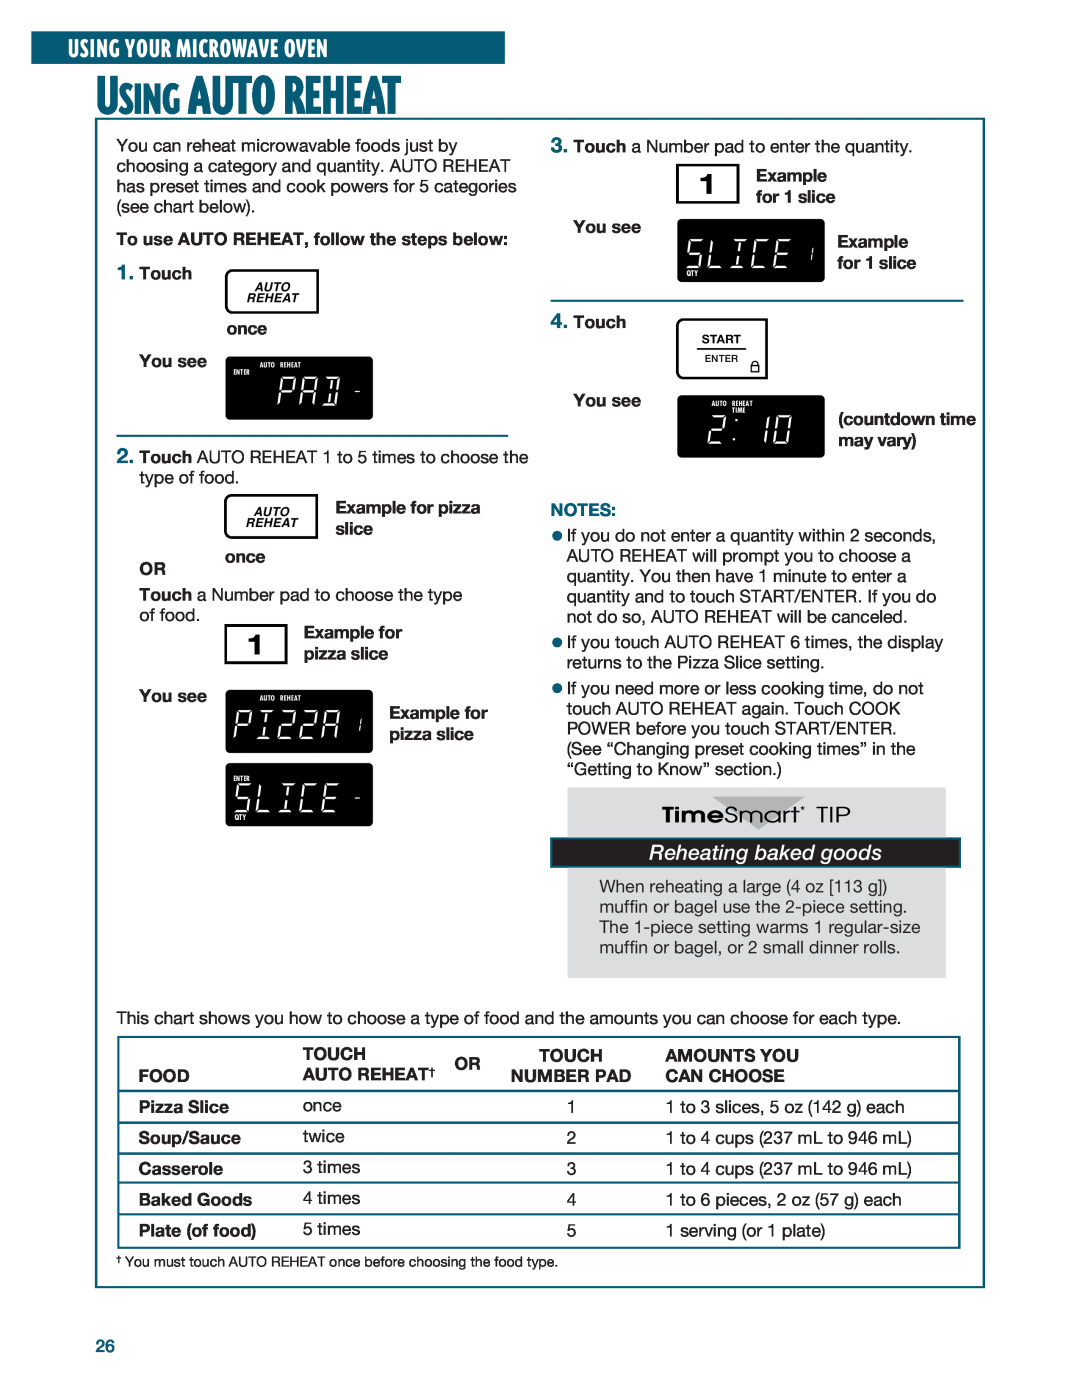 Whirlpool YMH6140XF installation instructions Using Auto Reheat, Reheating baked goods, Using Your Microwave Oven 